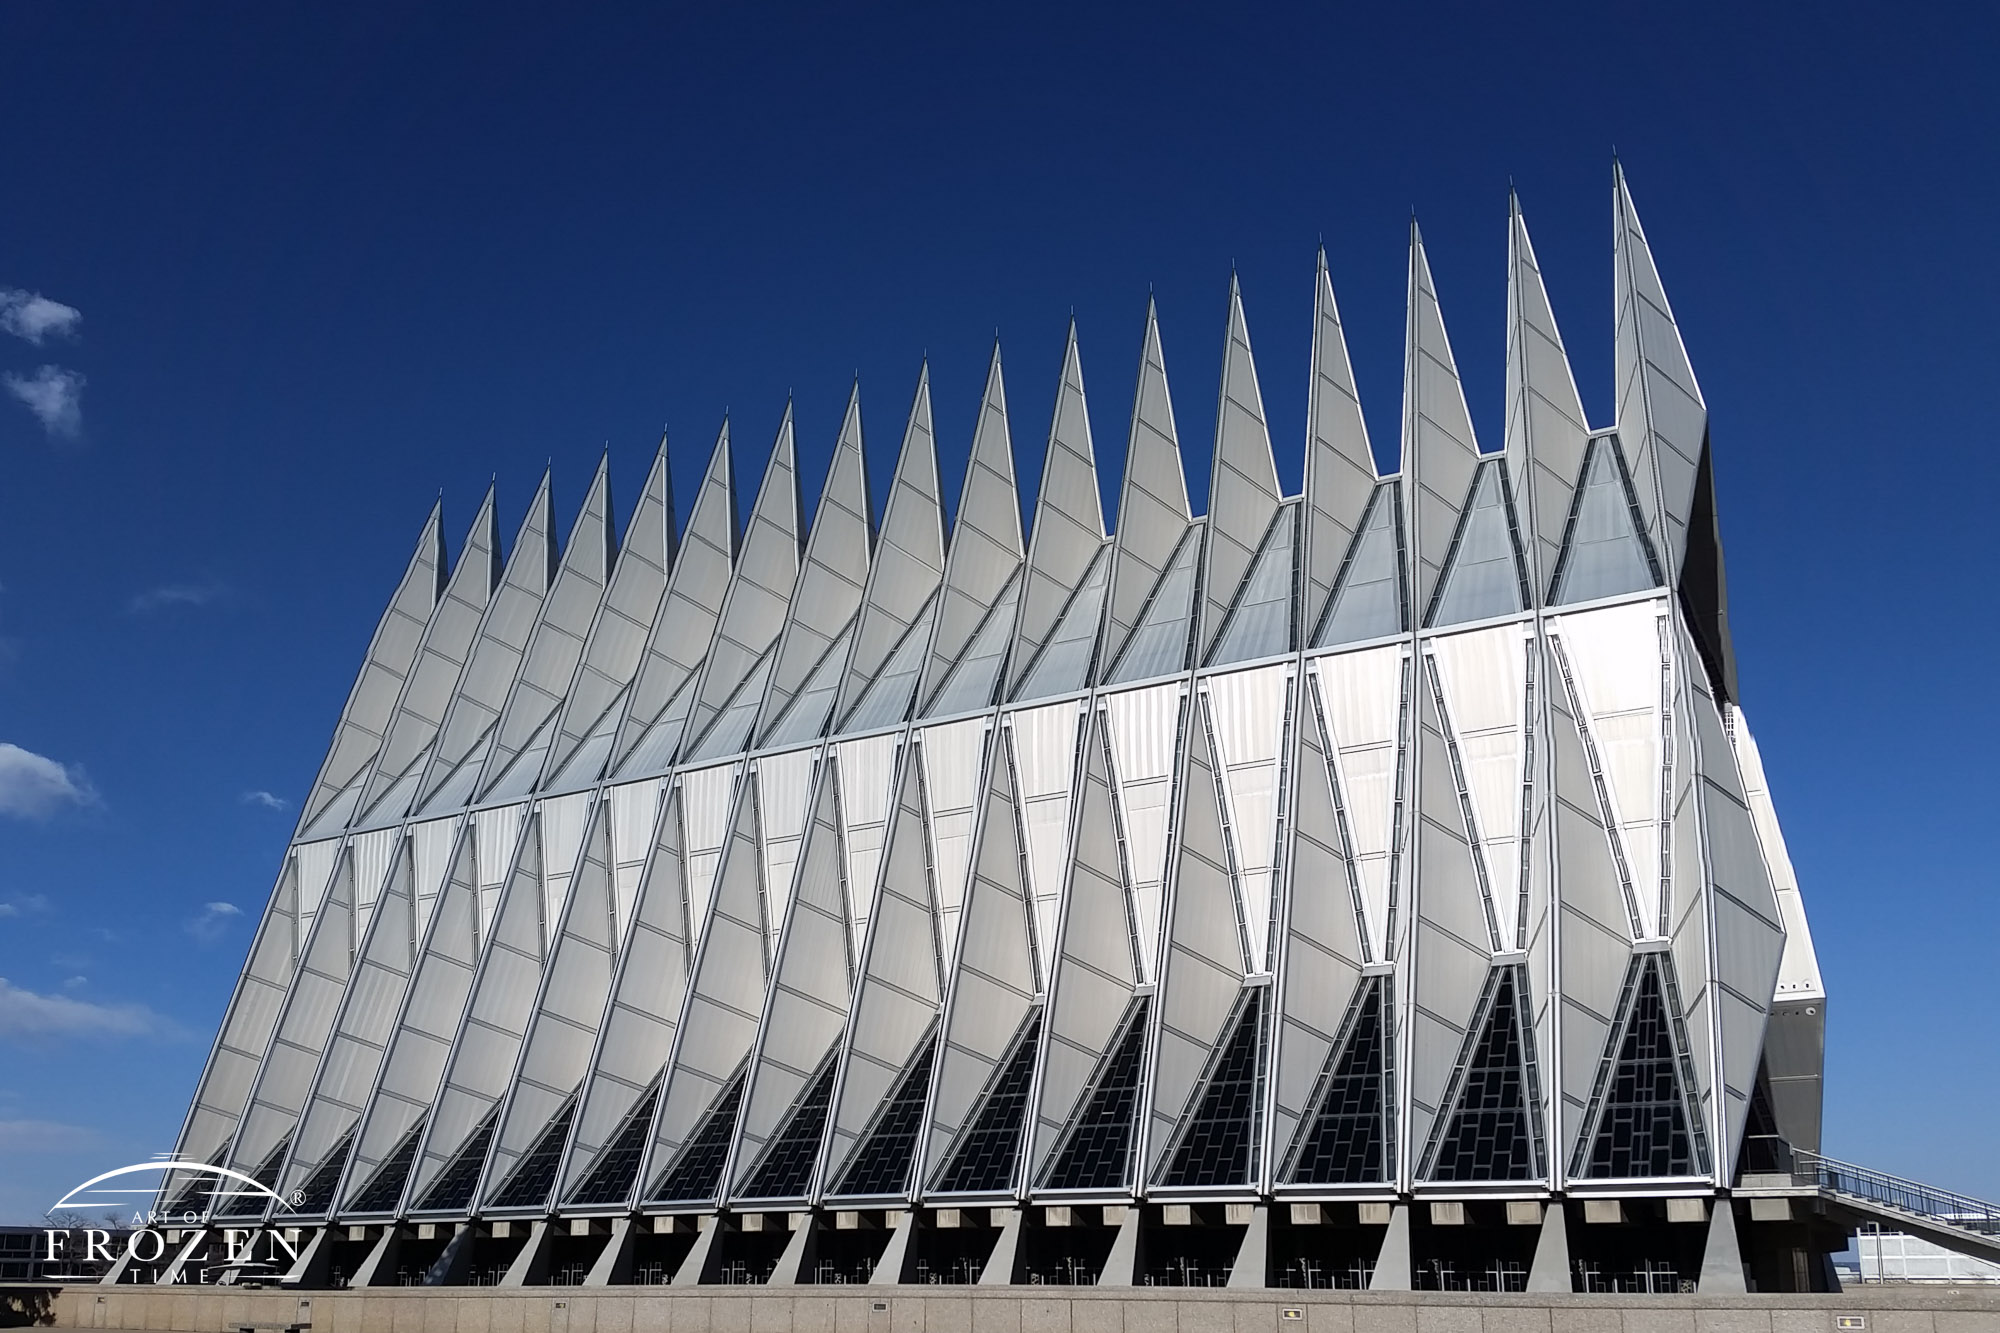 The Air Force Academy Chapel under the blue skies of Colorado Springs